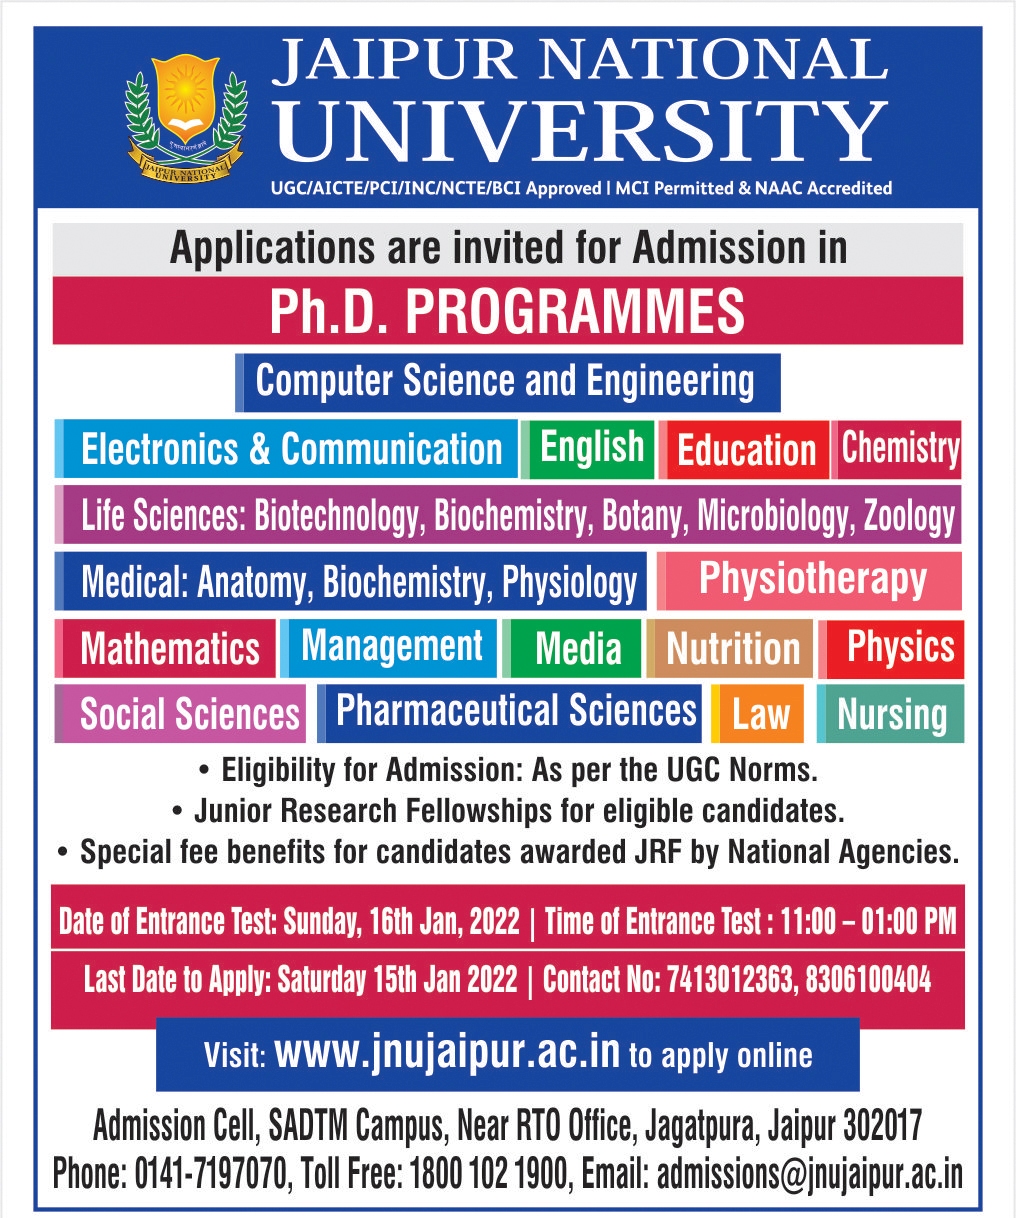 Applications are invited for Admission in Ph.D Programmes